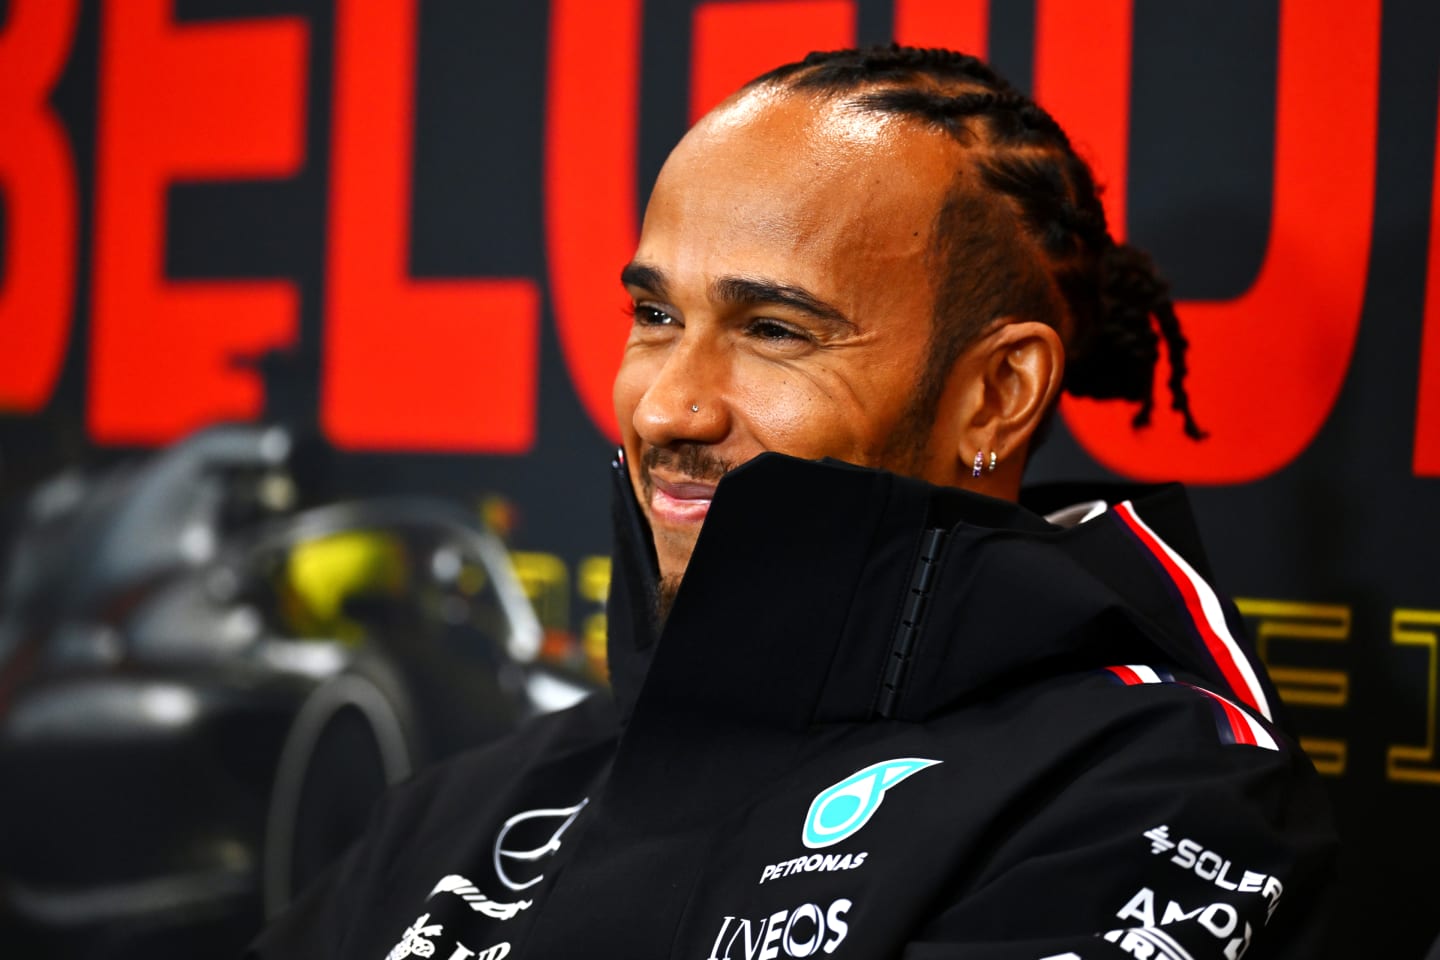 SPA, BELGIUM - JULY 27: Lewis Hamilton of Great Britain and Mercedes attends the Drivers Press Conference during previews ahead of the F1 Grand Prix of Belgium at Circuit de Spa-Francorchamps on July 27, 2023 in Spa, Belgium. (Photo by Dan Mullan/Getty Images)